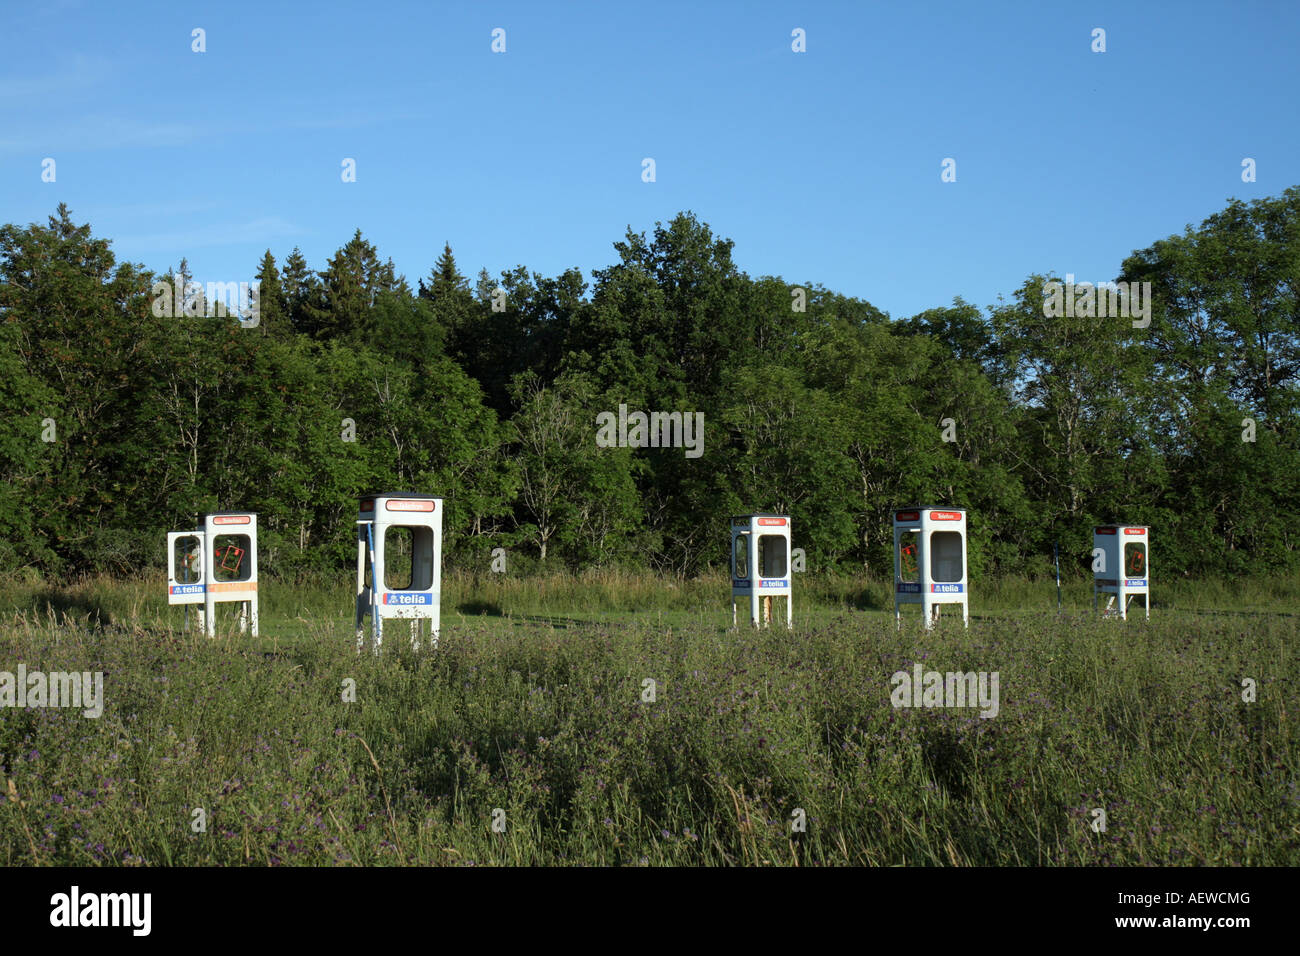 Field of scrapped phone booths Stock Photo